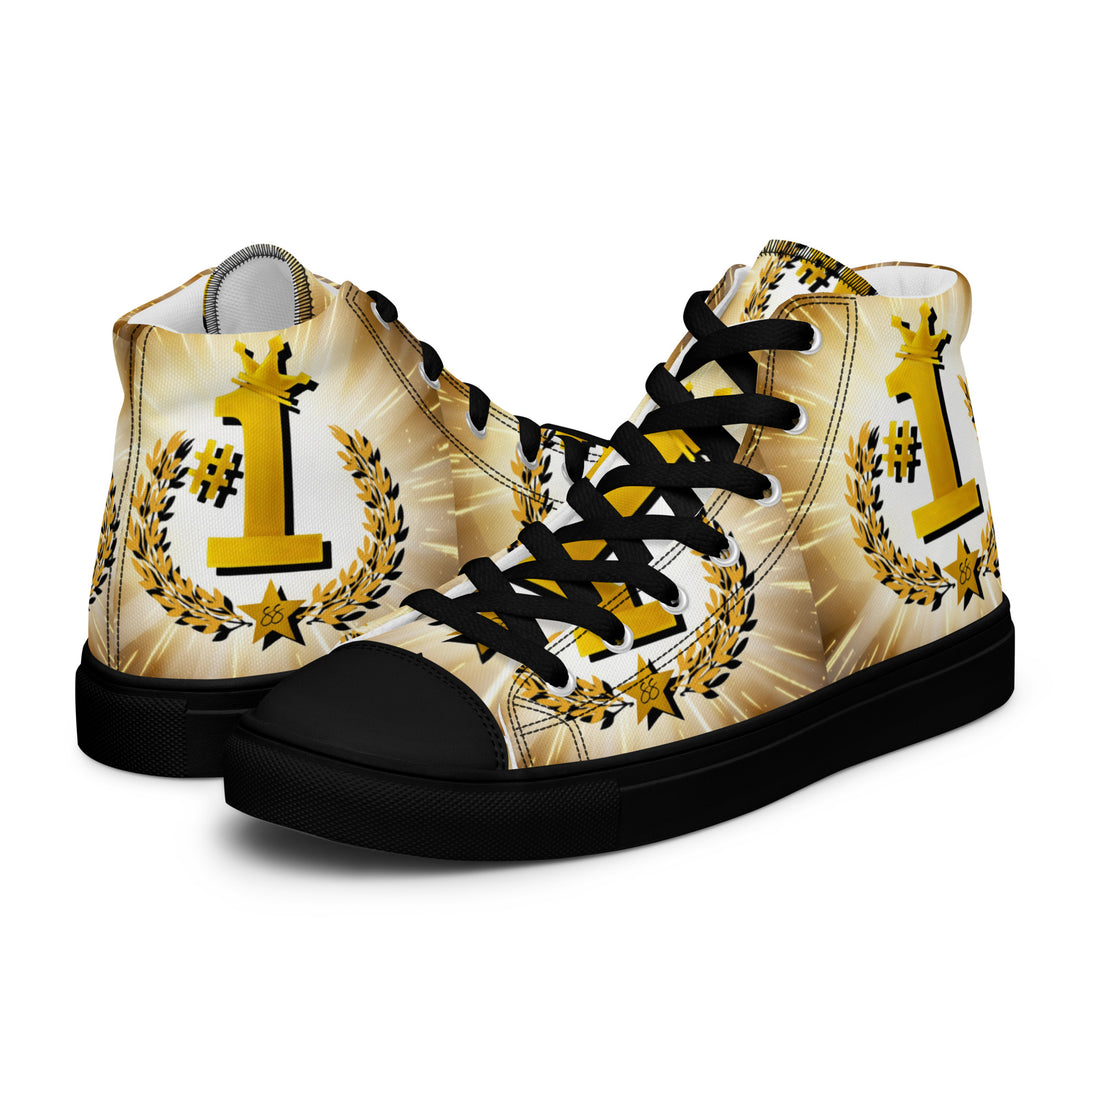 The No.1 Designs High Top Shoes by Sidow Sobrino. 
Only $149.99 
Shop Now at 😃👇 
No1designs.com 

#No1designs #unleashyourdaring #theworldsno1superstar #sagaftramember #StardomReflections #Fashion #SelfExpression #Brilliance #Empowerment #Authenticity #celebritymerch